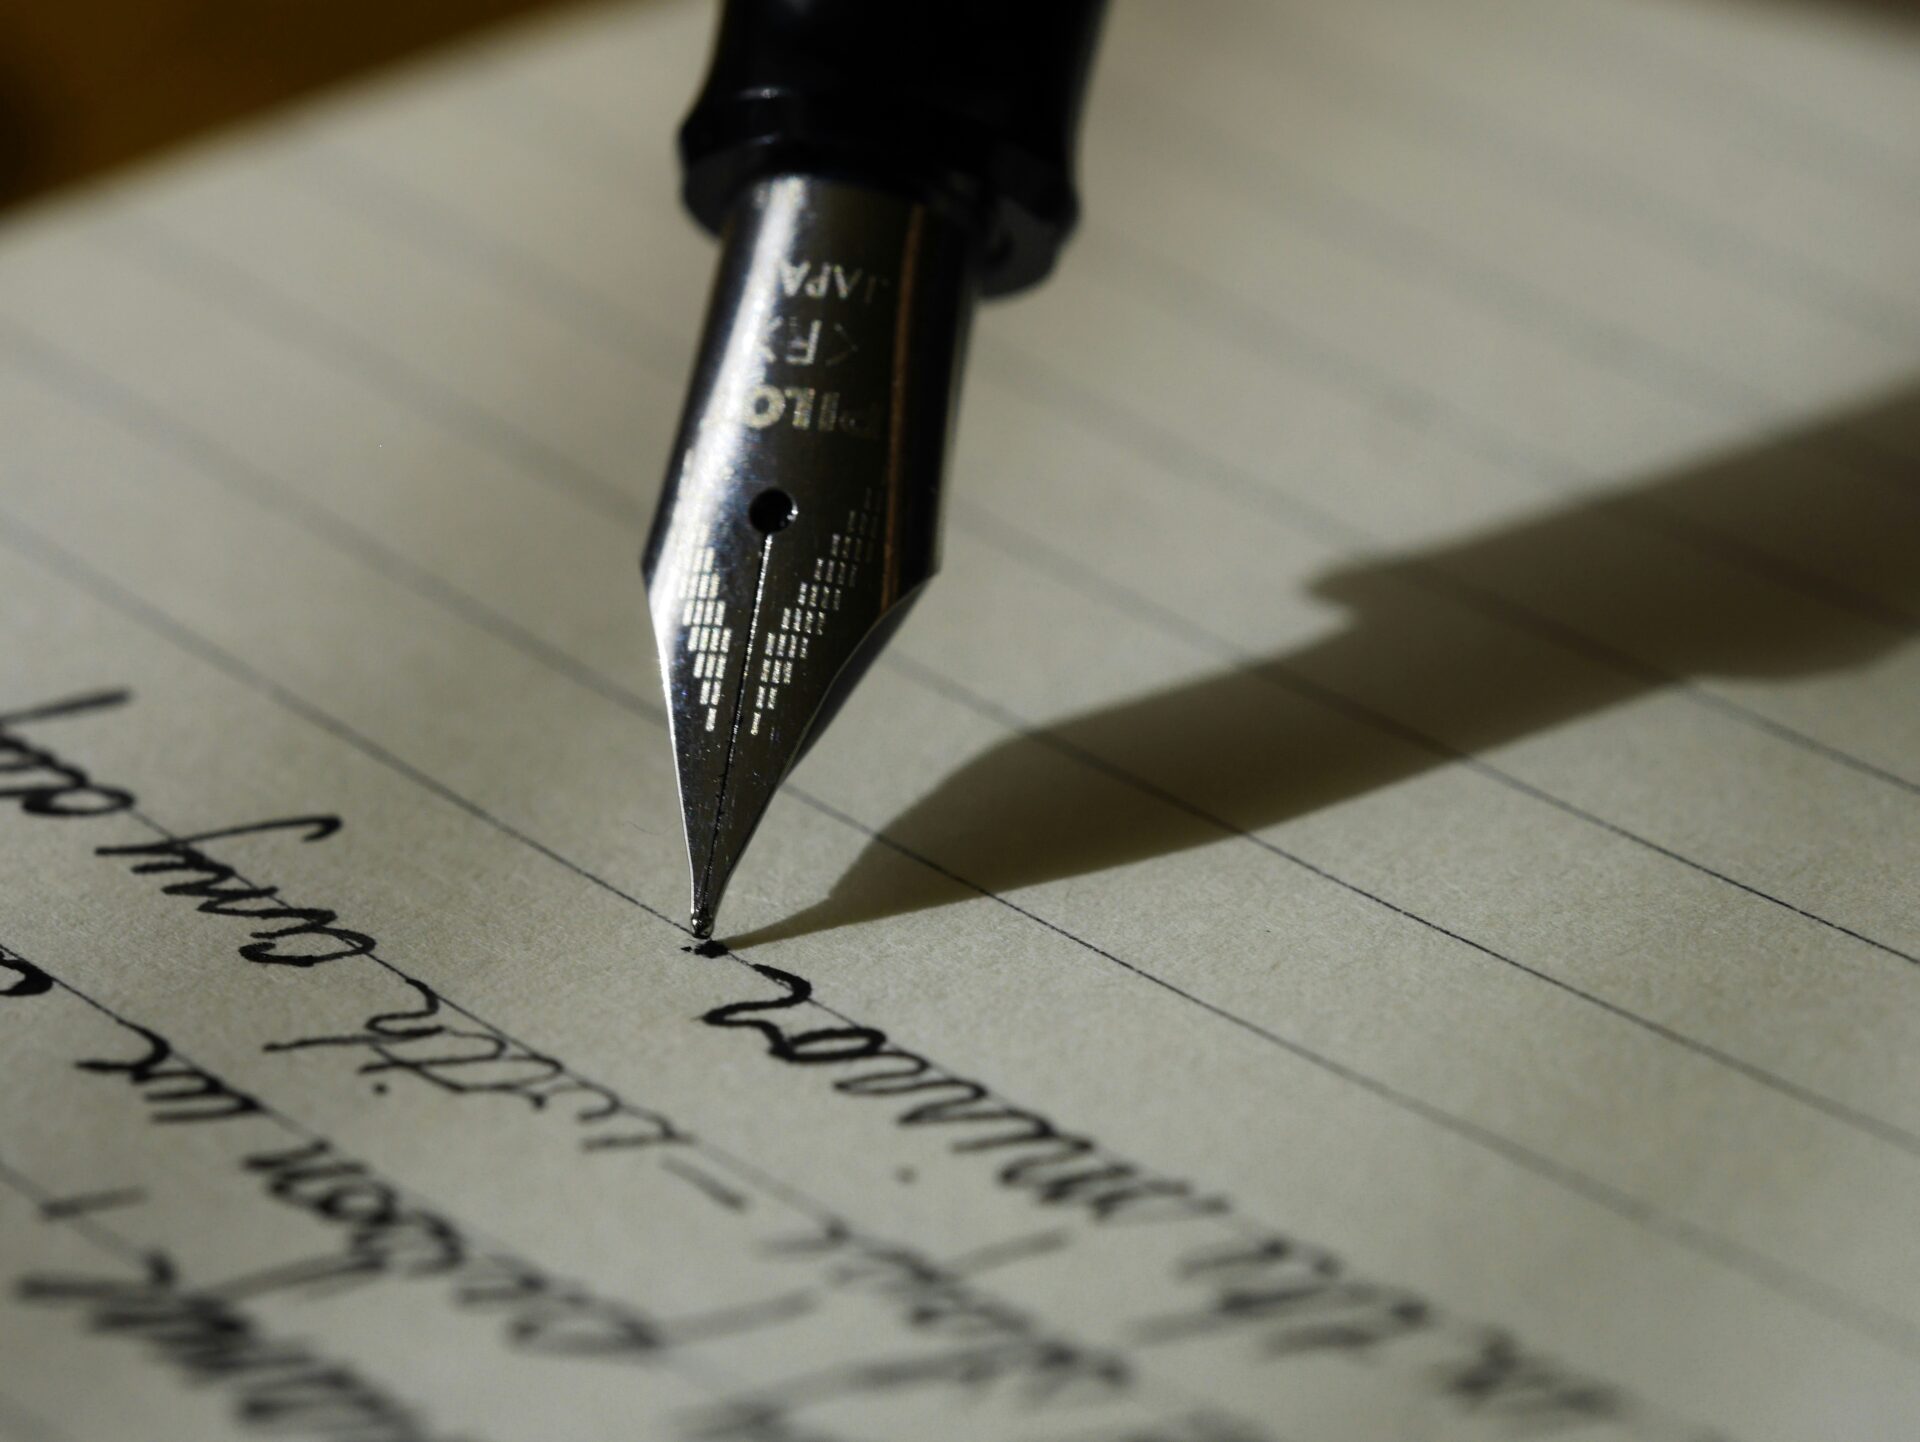 image shows an ink-filled fountain pen writing a letter